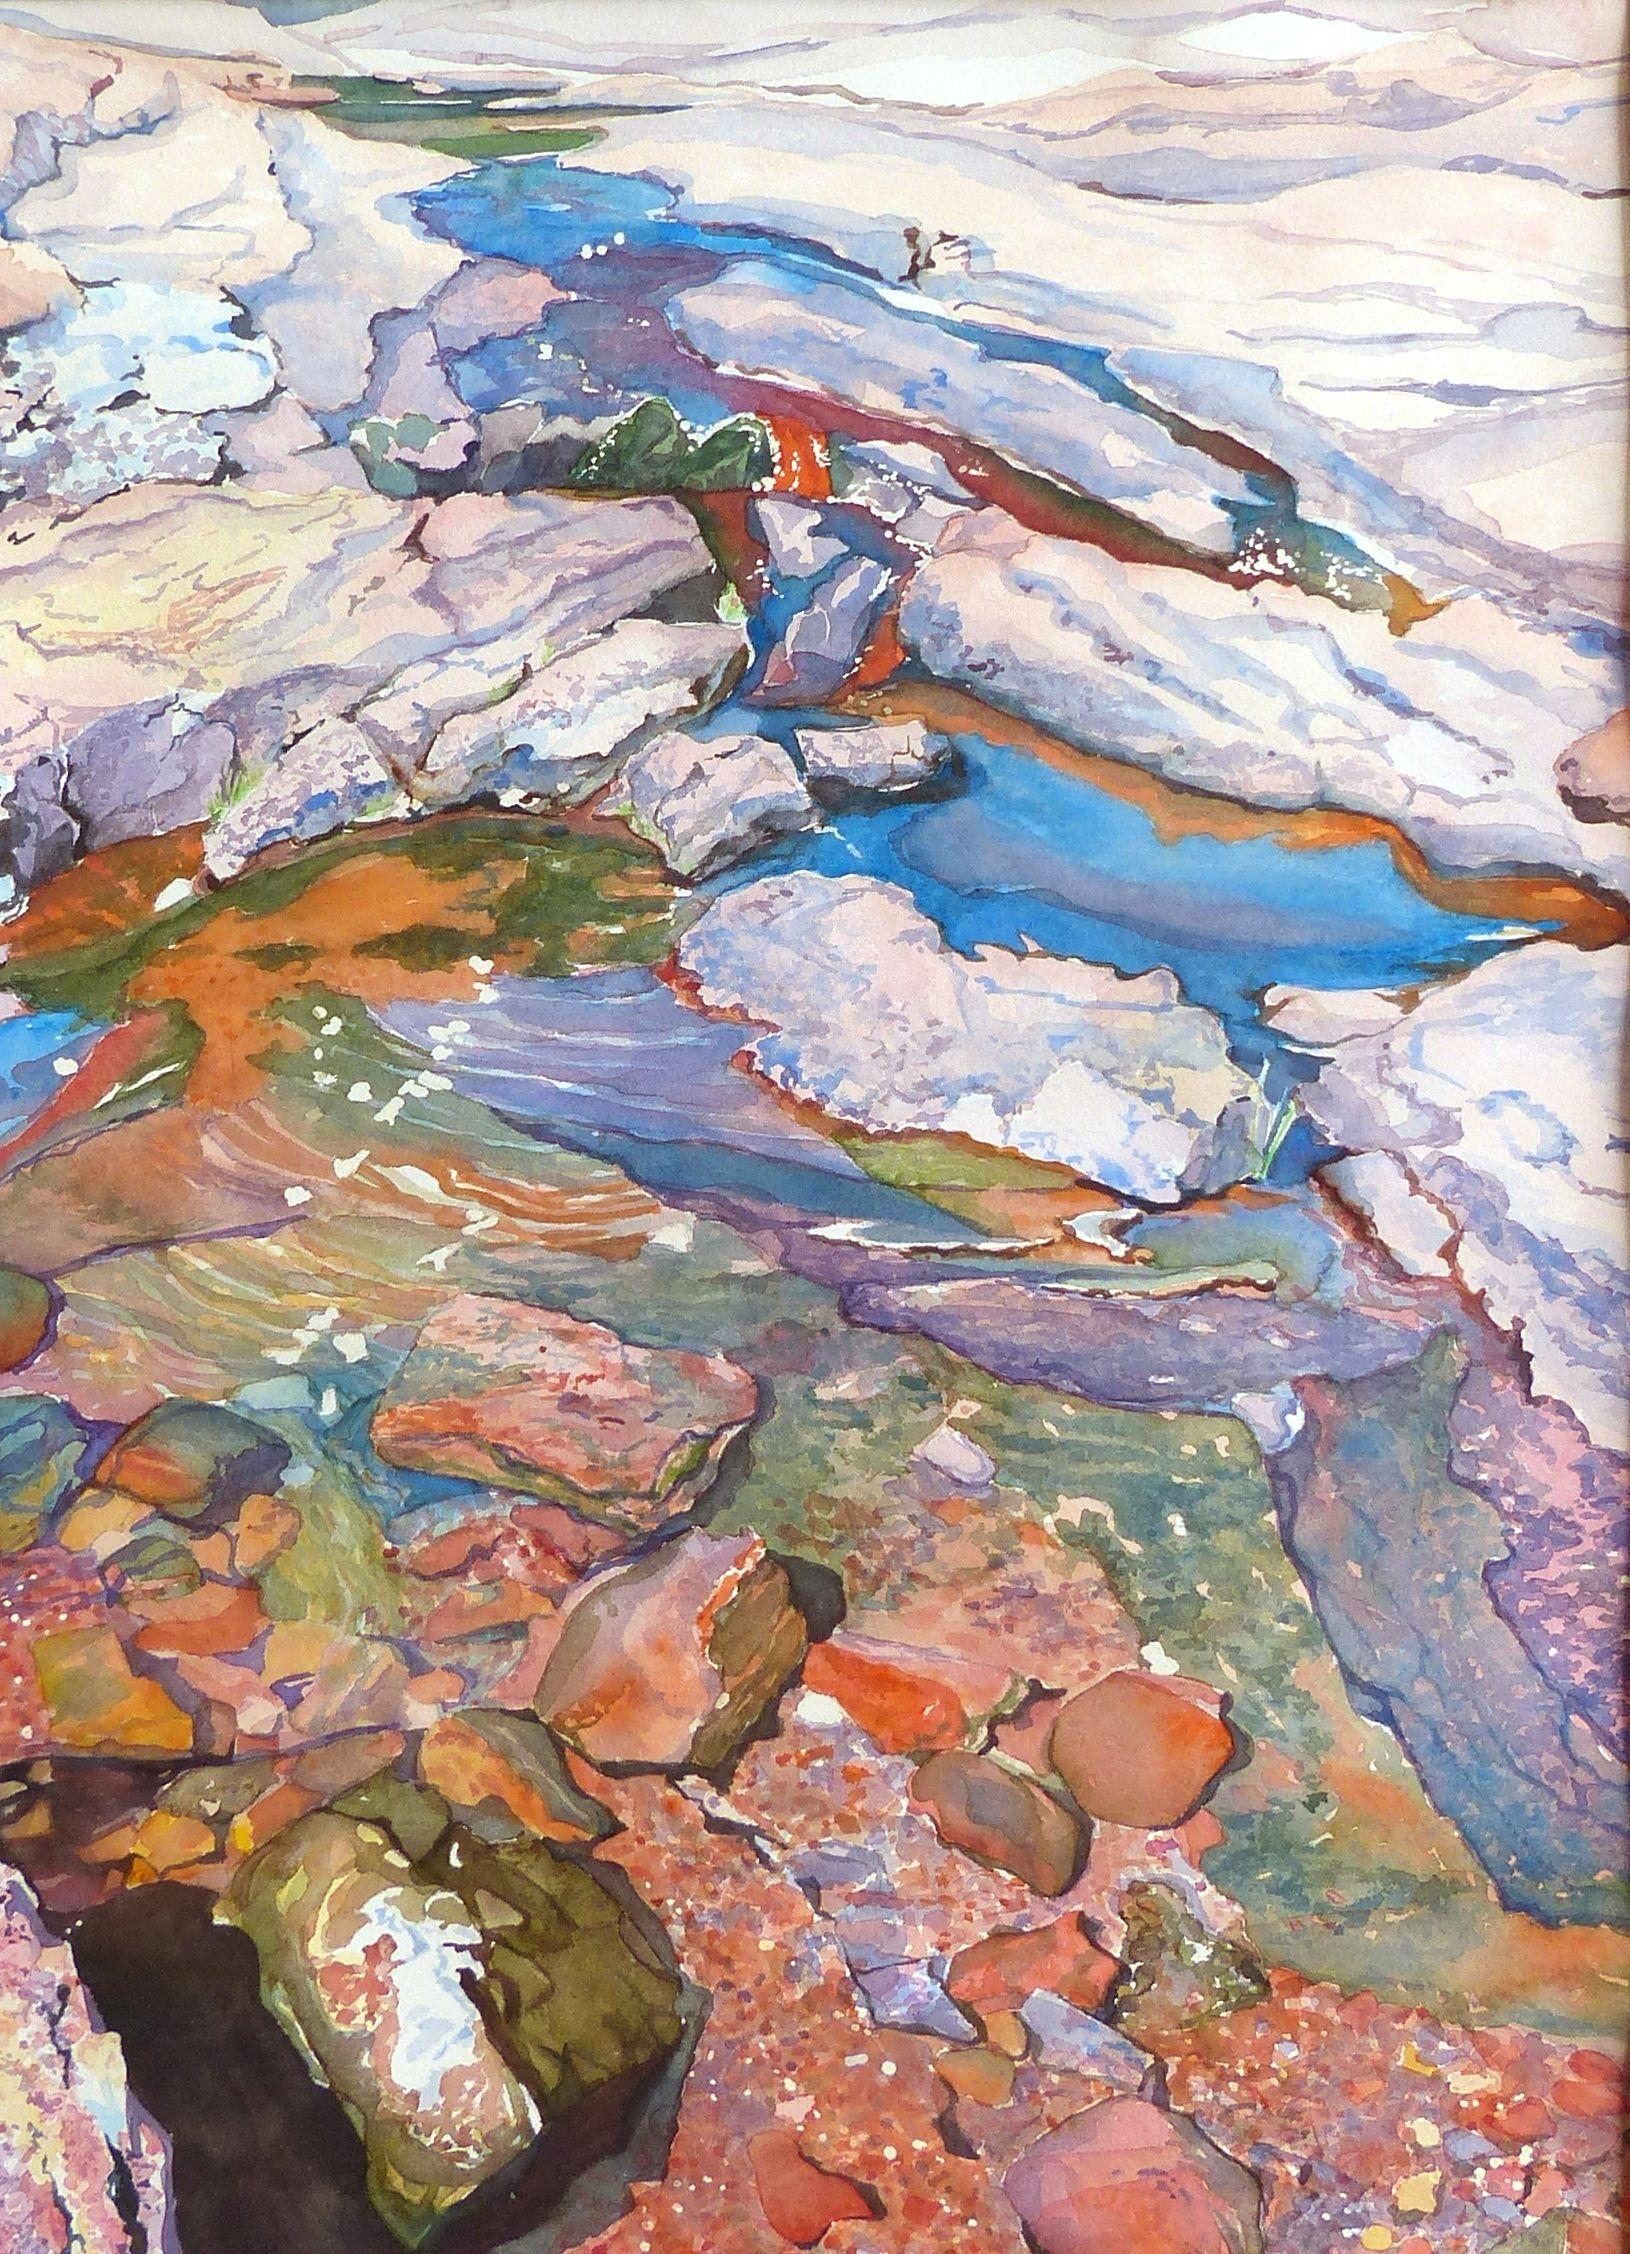 Stream at Enchanted Rock, Painting, Watercolor on Watercolor Paper - Art by Leslie White